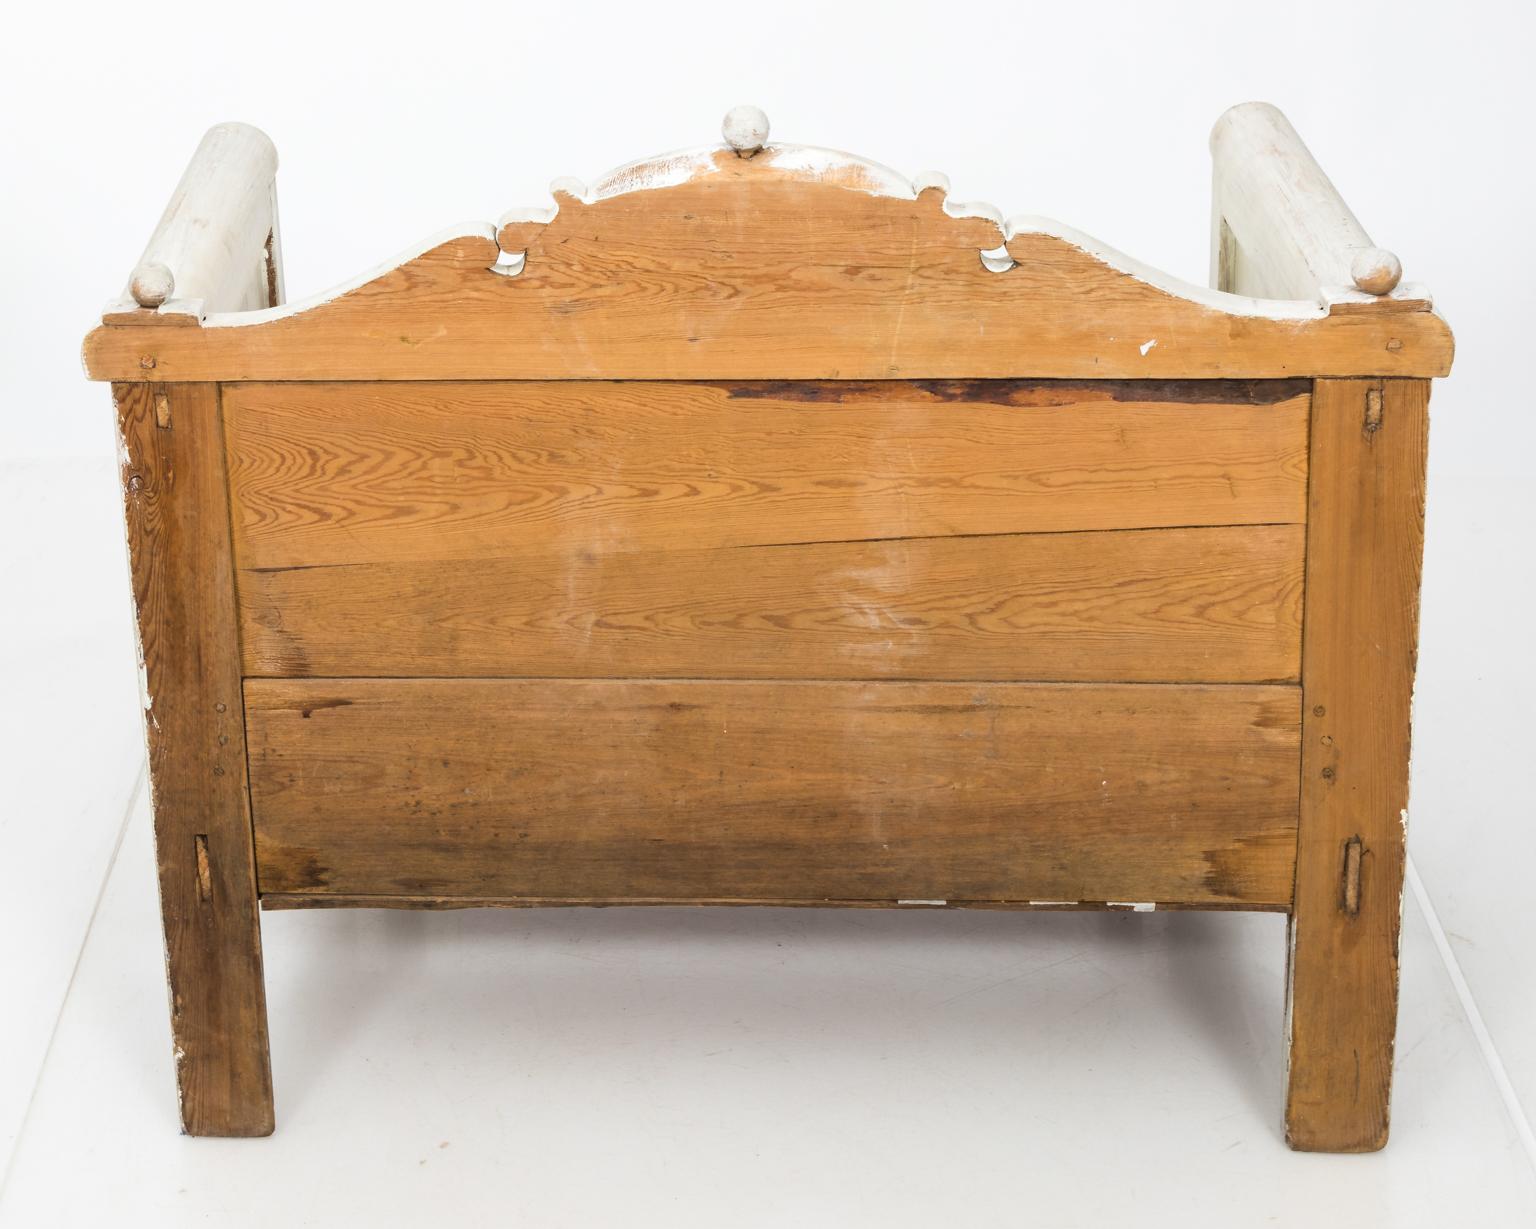 Swedish white painted bench with arms, a curved top rail, and bottom storage underneath seat, circa 1900.
 